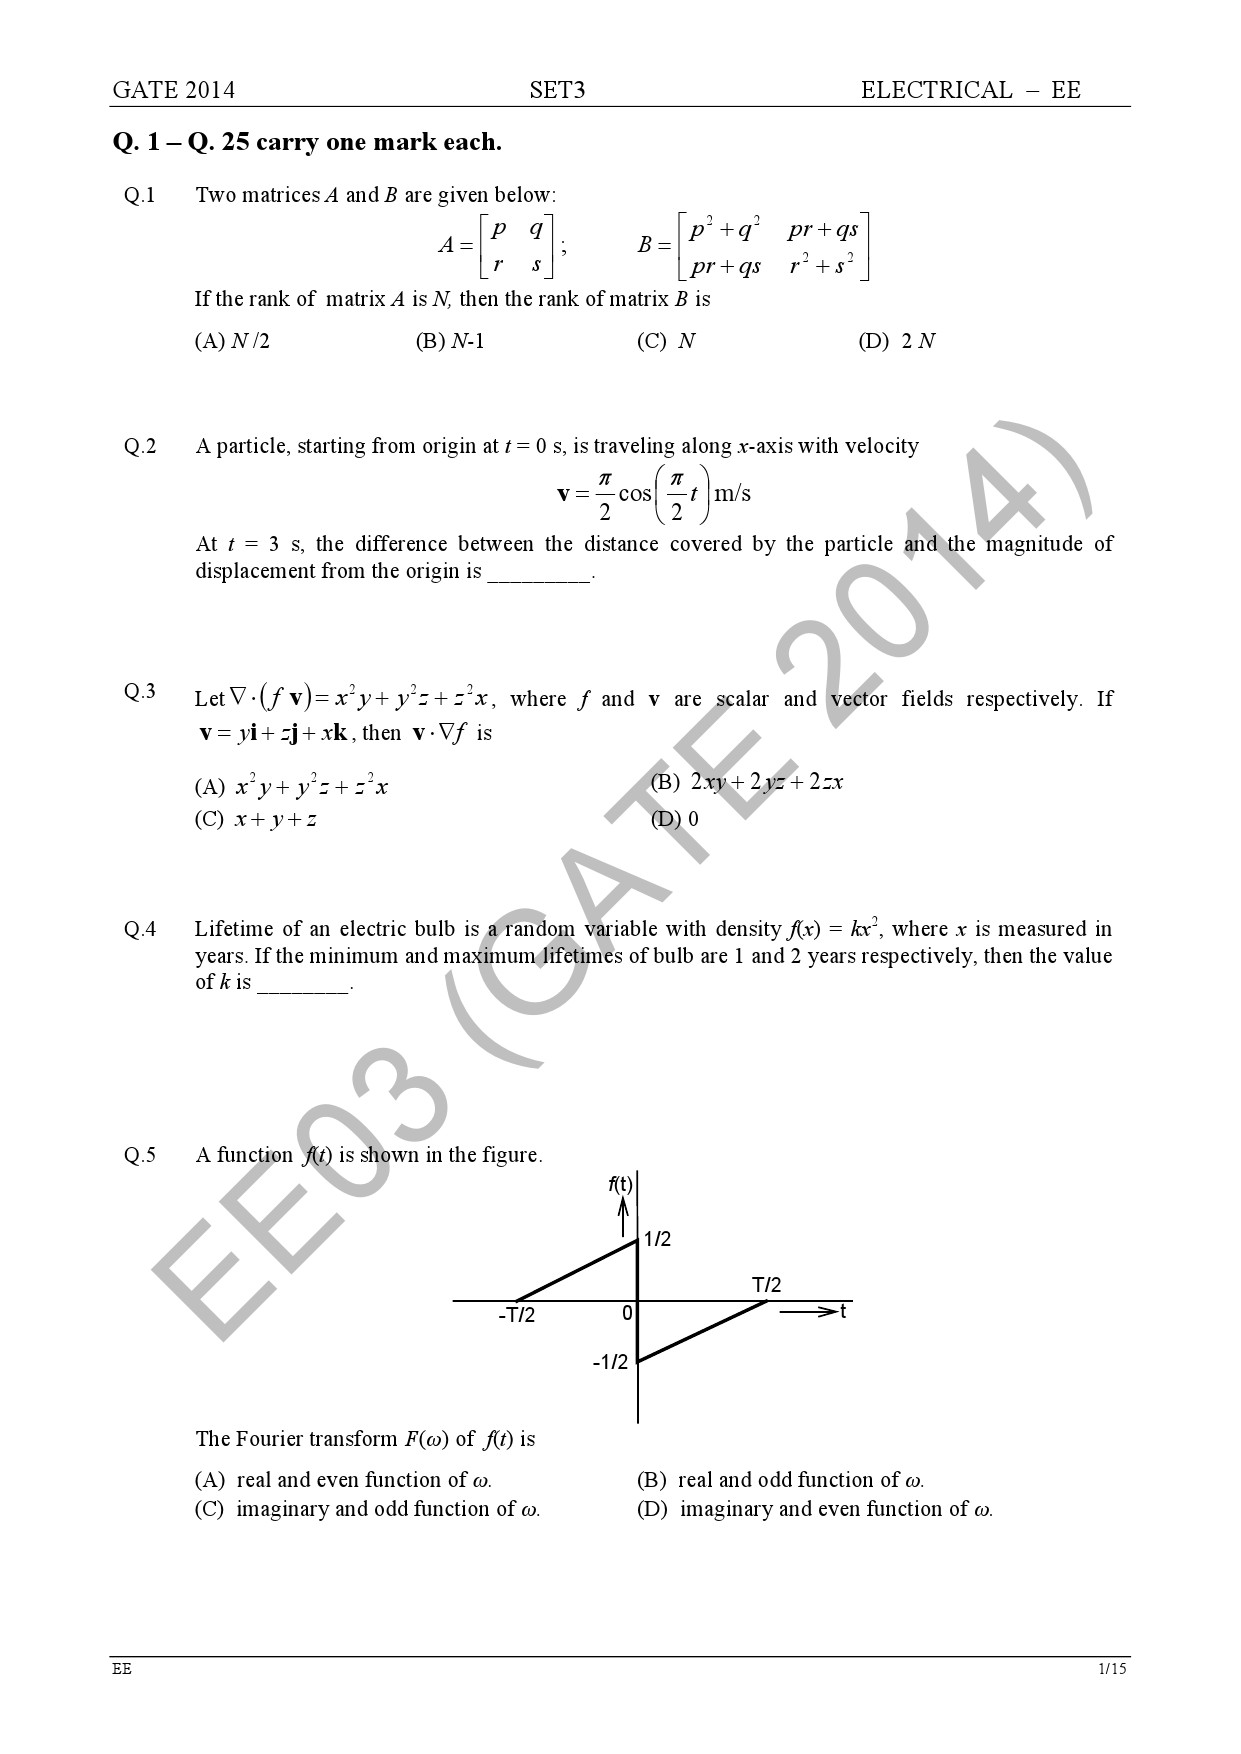 GATE Exam Question Paper 2014 Electrical Engineering Set 3 7